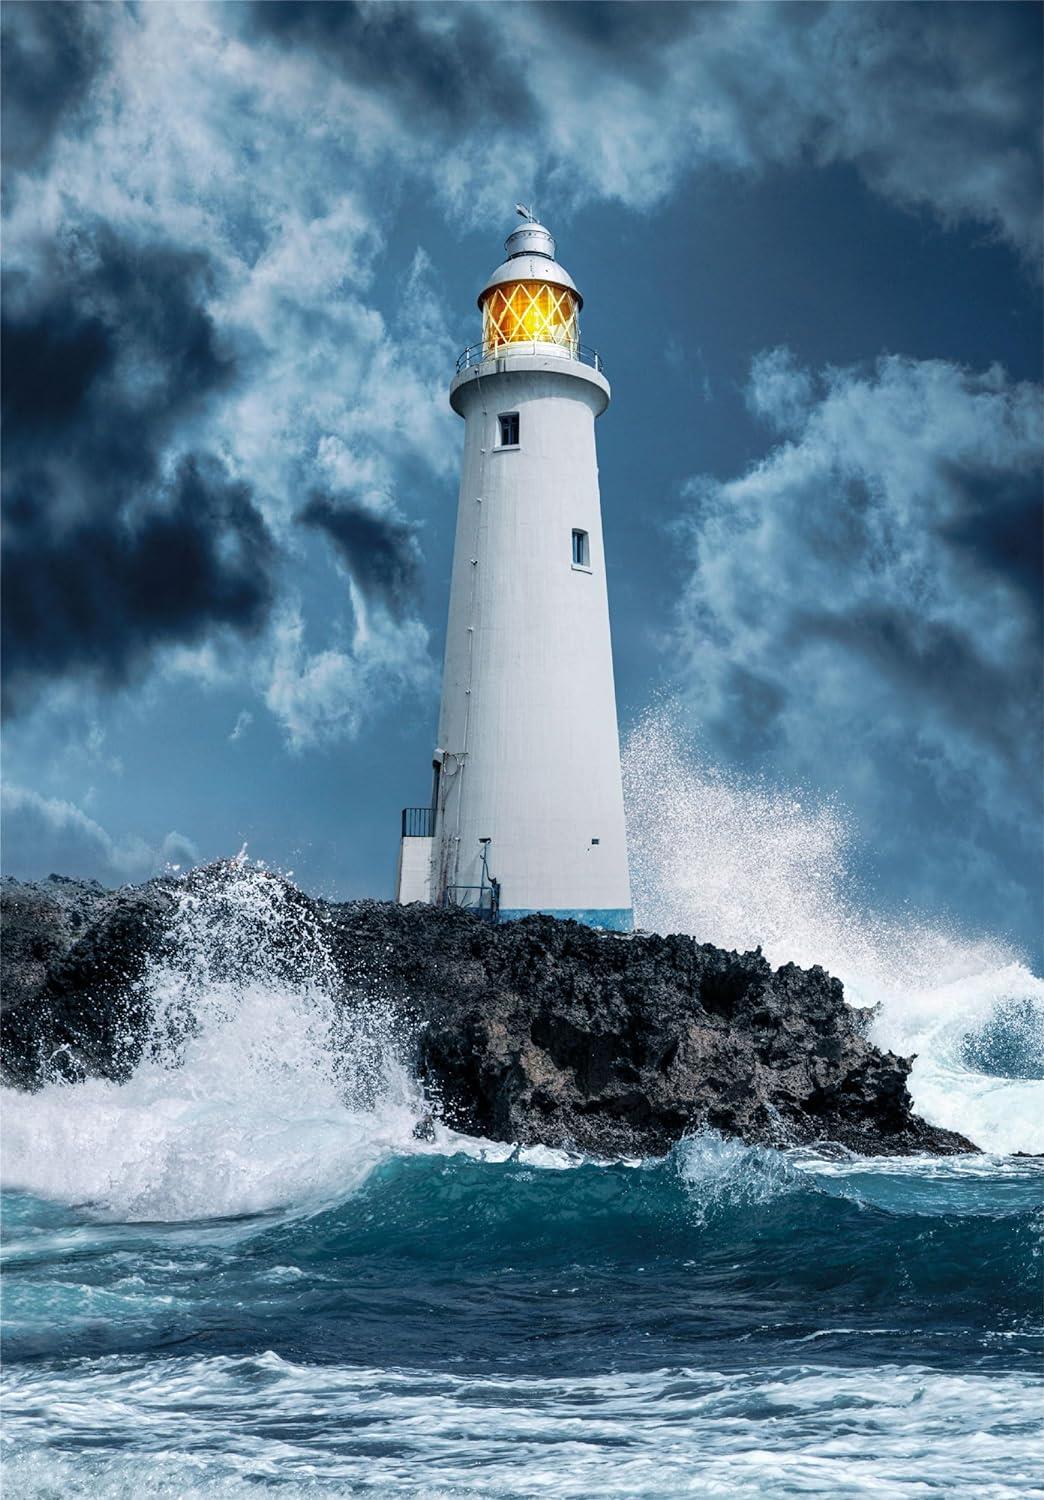 Clementoni Lighthouse In The Storm Jigsaw Puzzle (1000 Pieces)